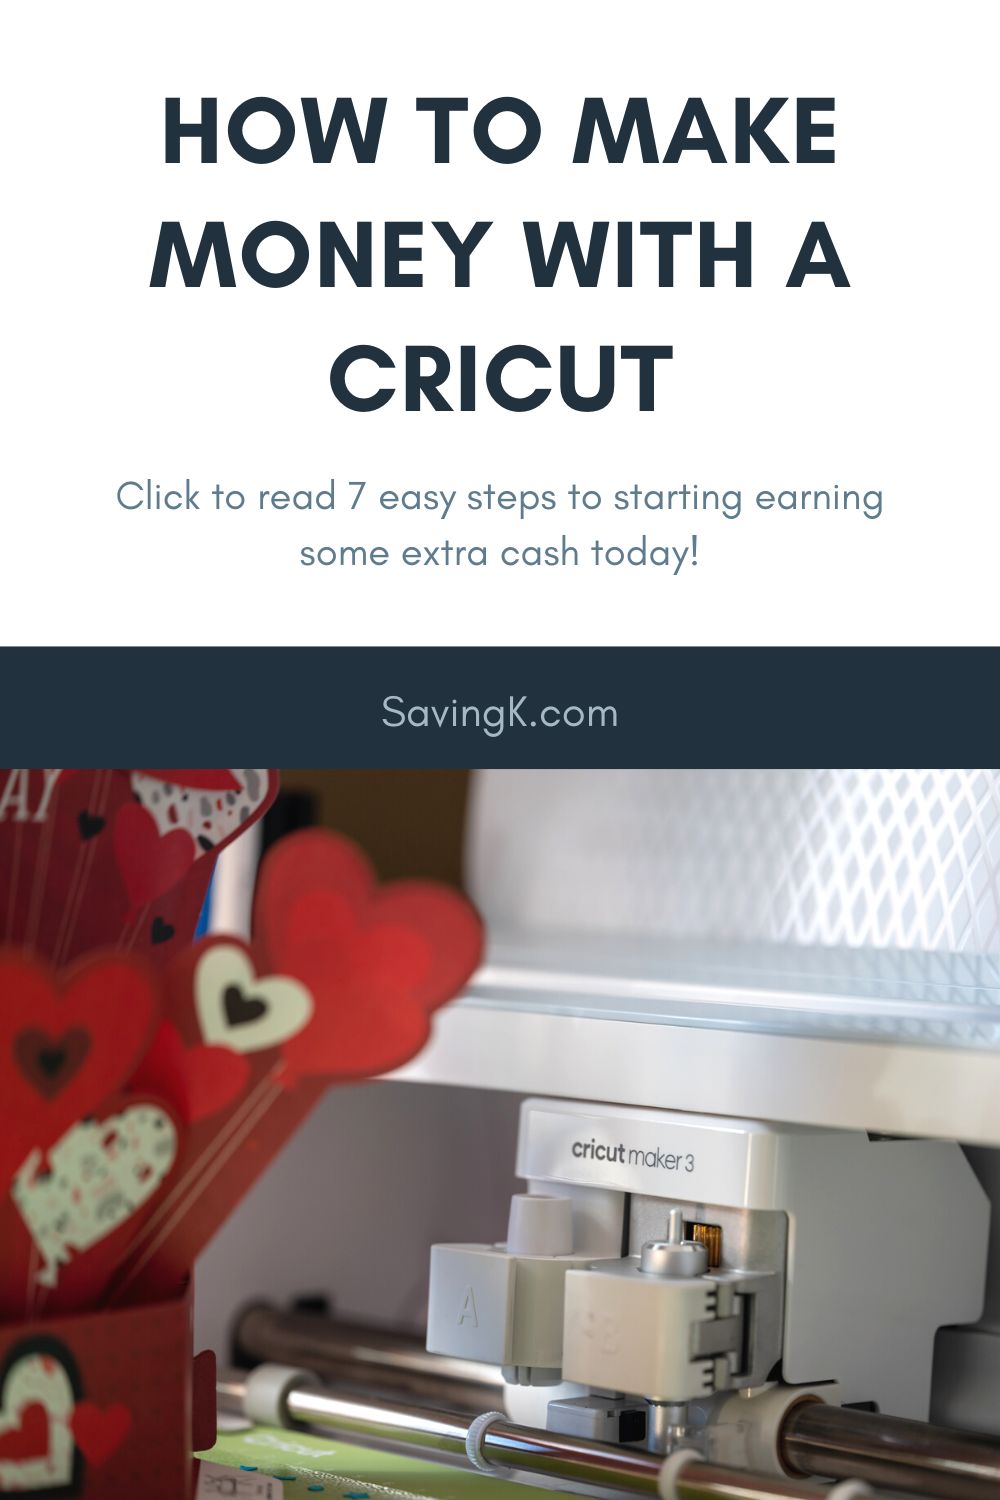 How To Make Money With A Cricut